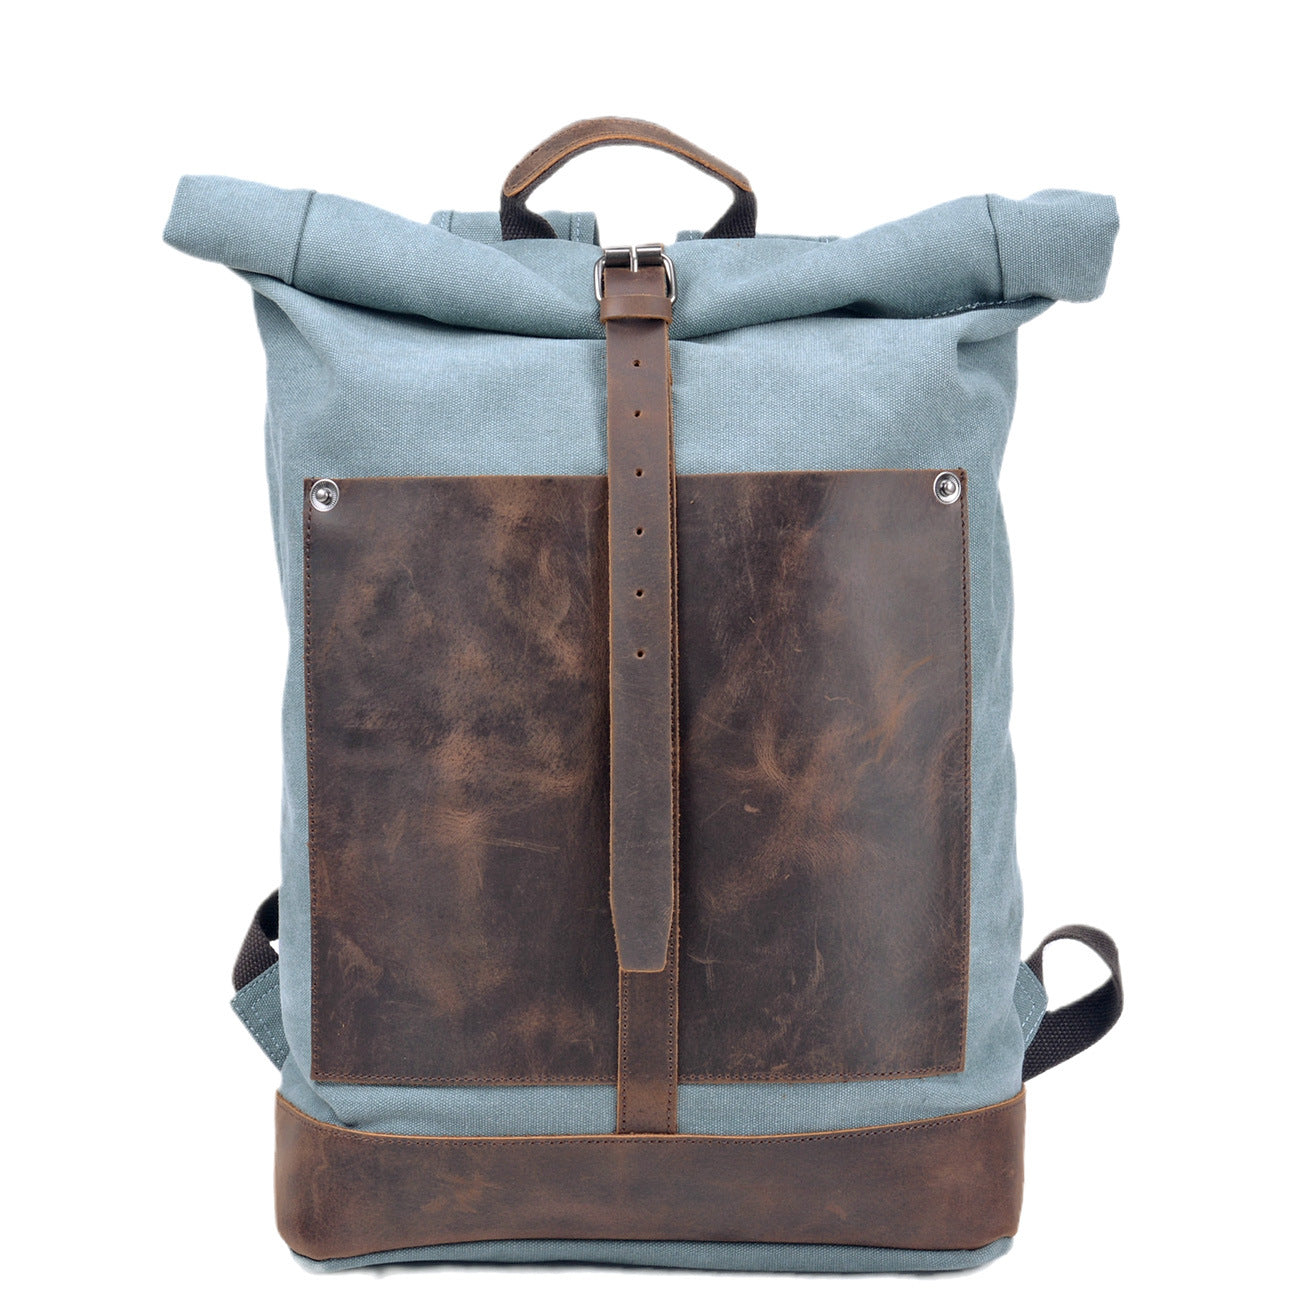 Vintage Cotton Canvas Roll Top Backpack